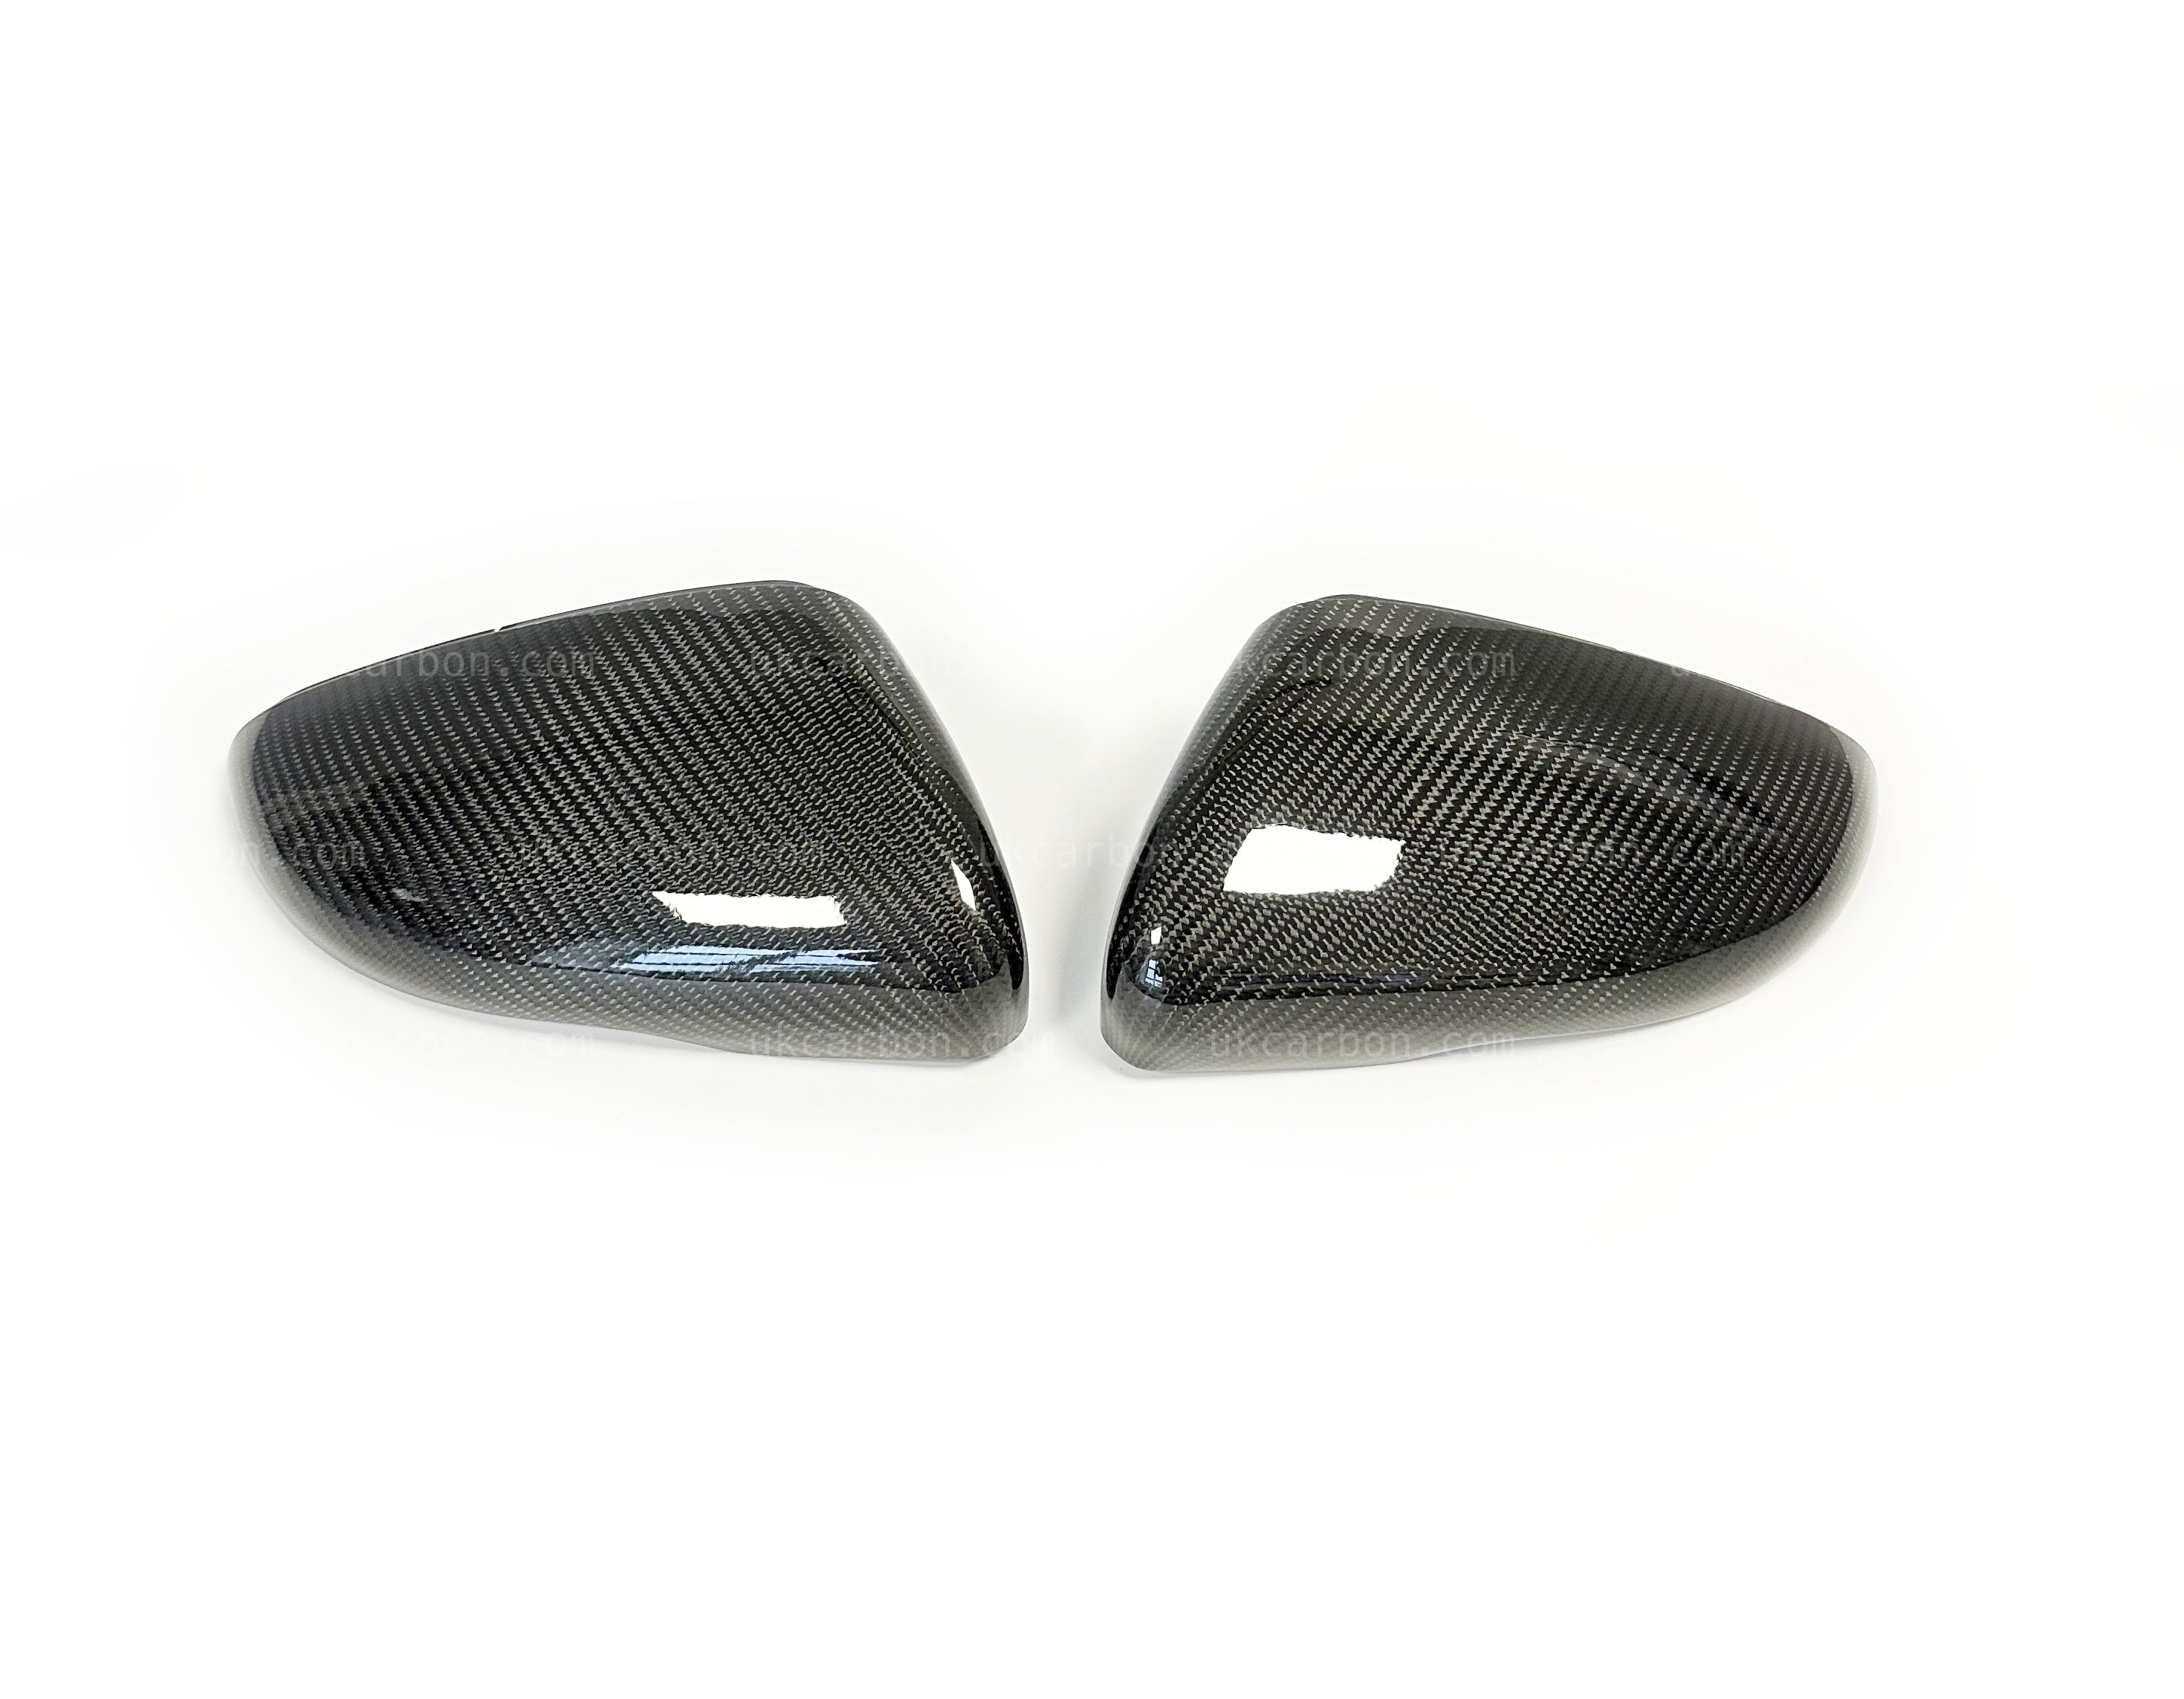 Volkswagen VW Golf GTi R MK6 Carbon Wing Mirror Cover Replacements by UKCarbon